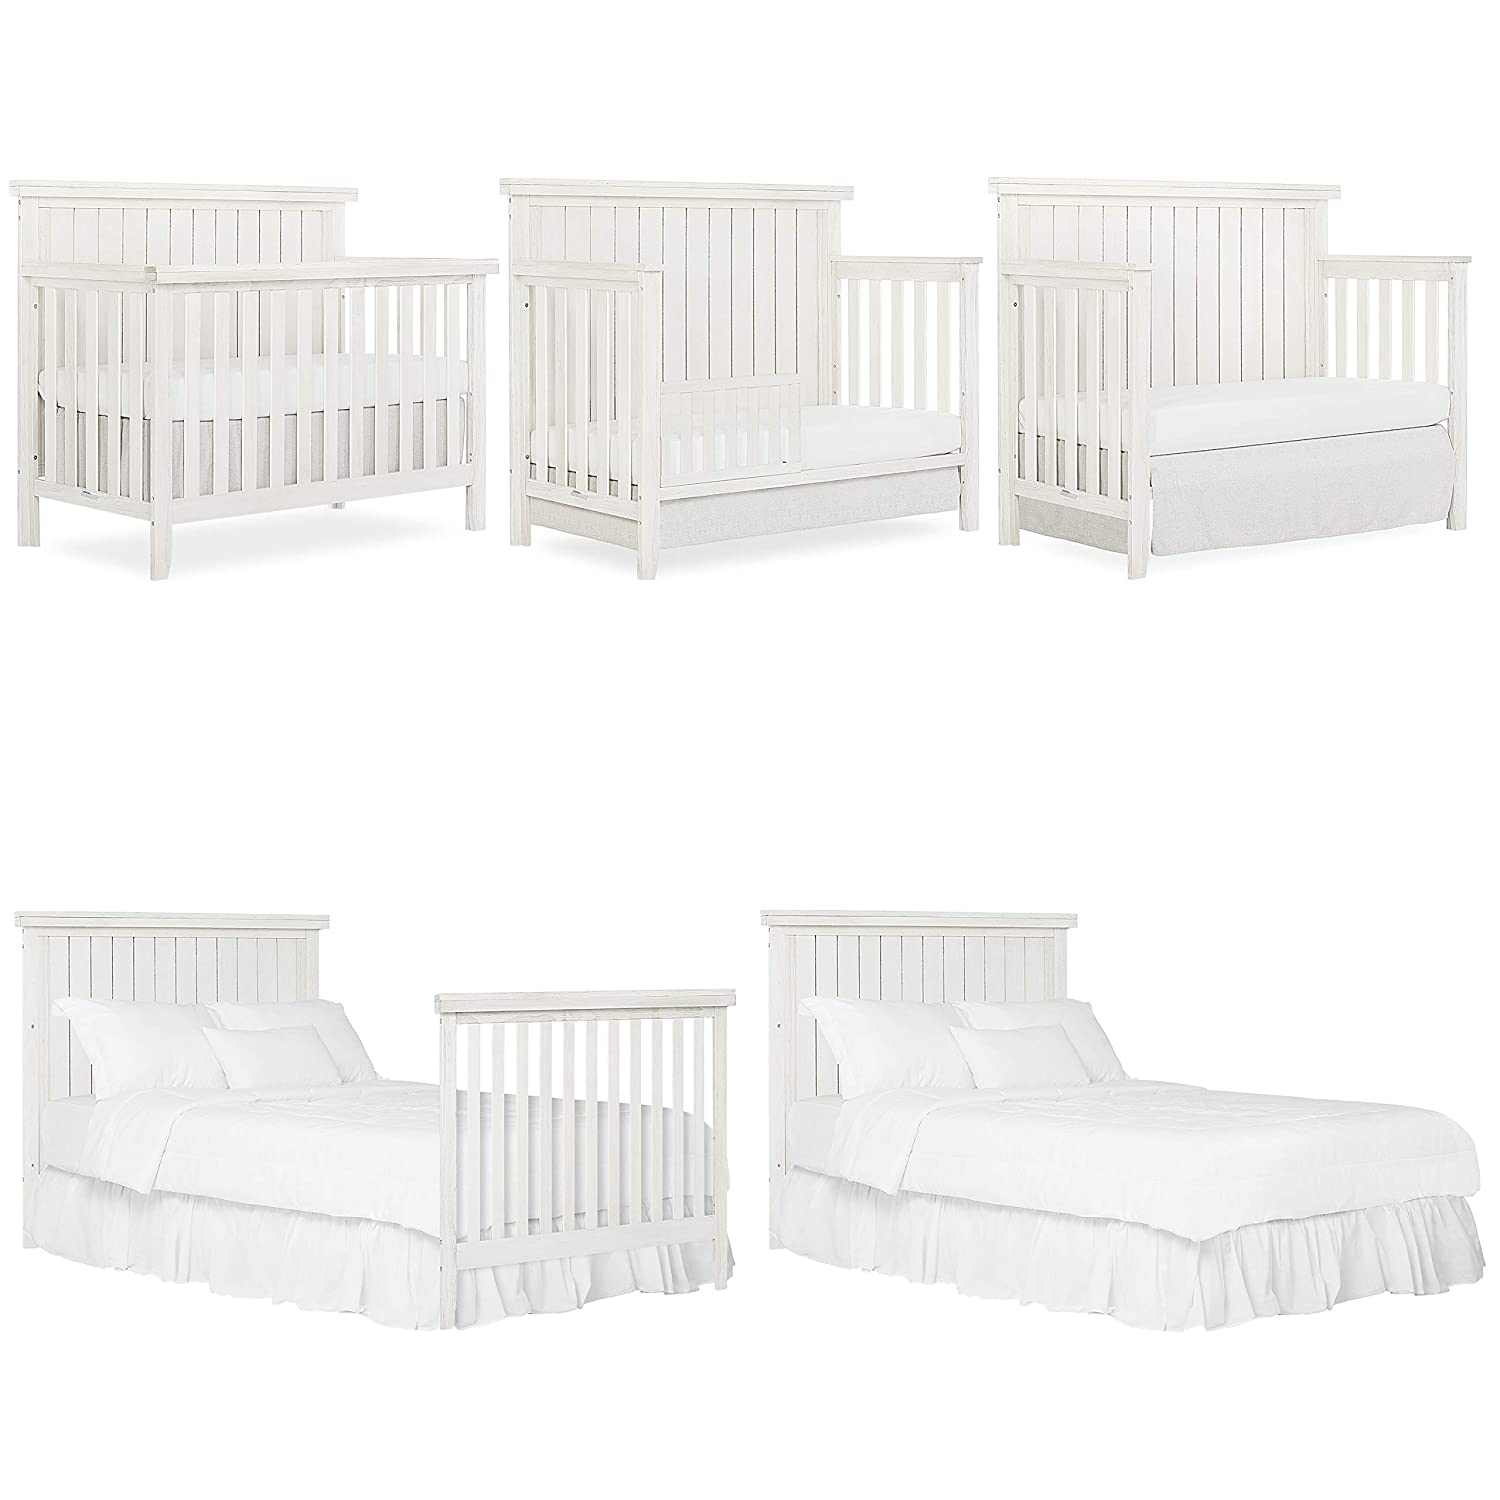 Sweetpea Baby Red Wood 4-in-1 Convertible Crib in Weathered White - $160